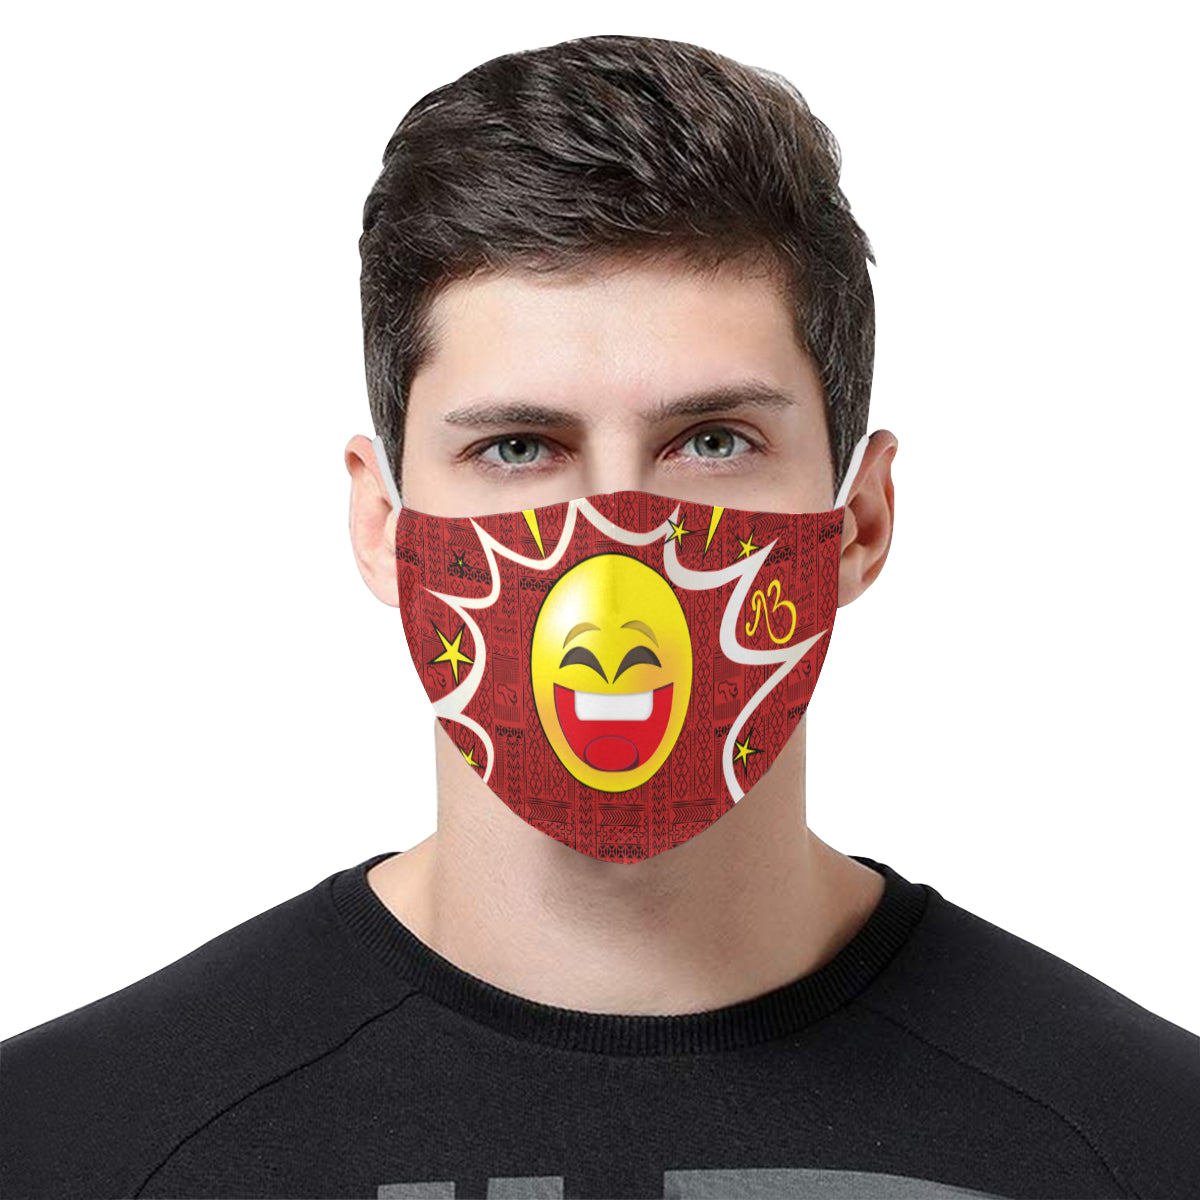 Grin Tribal Print Comic Emoji Cotton Fabric Face Mask with Filter Slot and Adjustable Strap - Non-medical use (2 Filters Included)